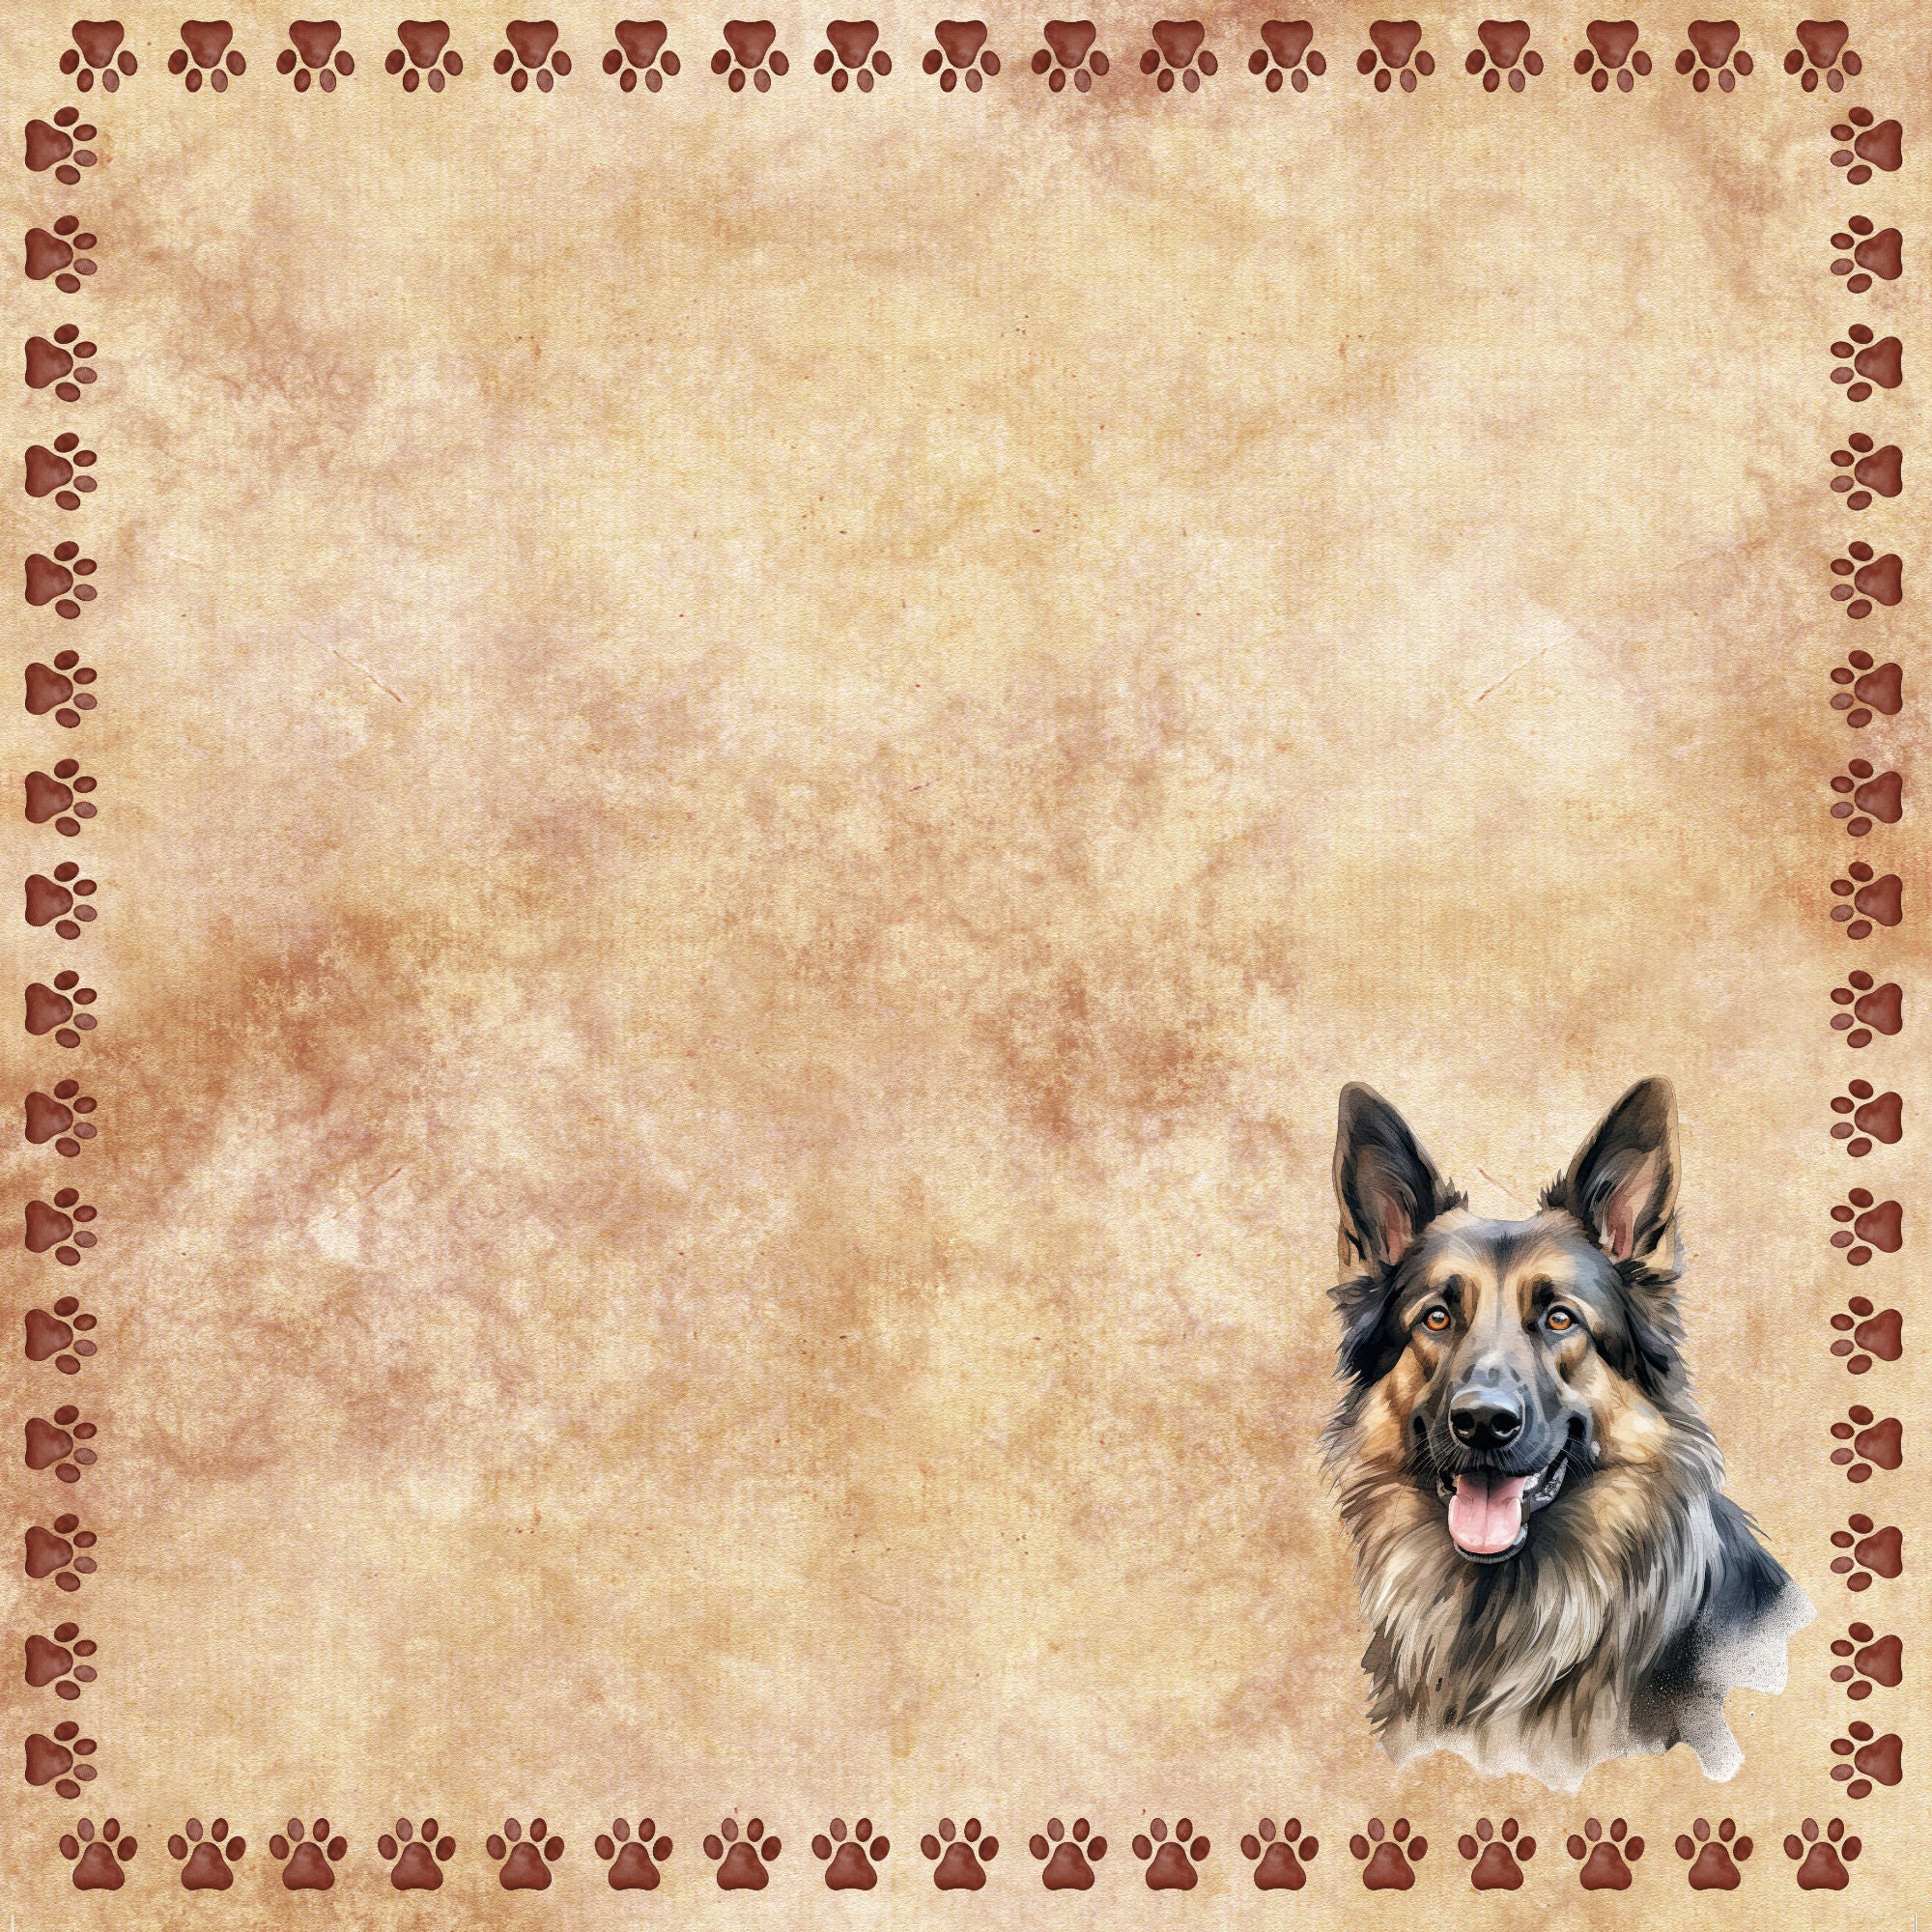 Dog Breeds Collection German Shepherd 2 12 x 12 Double-Sided Scrapbook Paper by SSC Designs